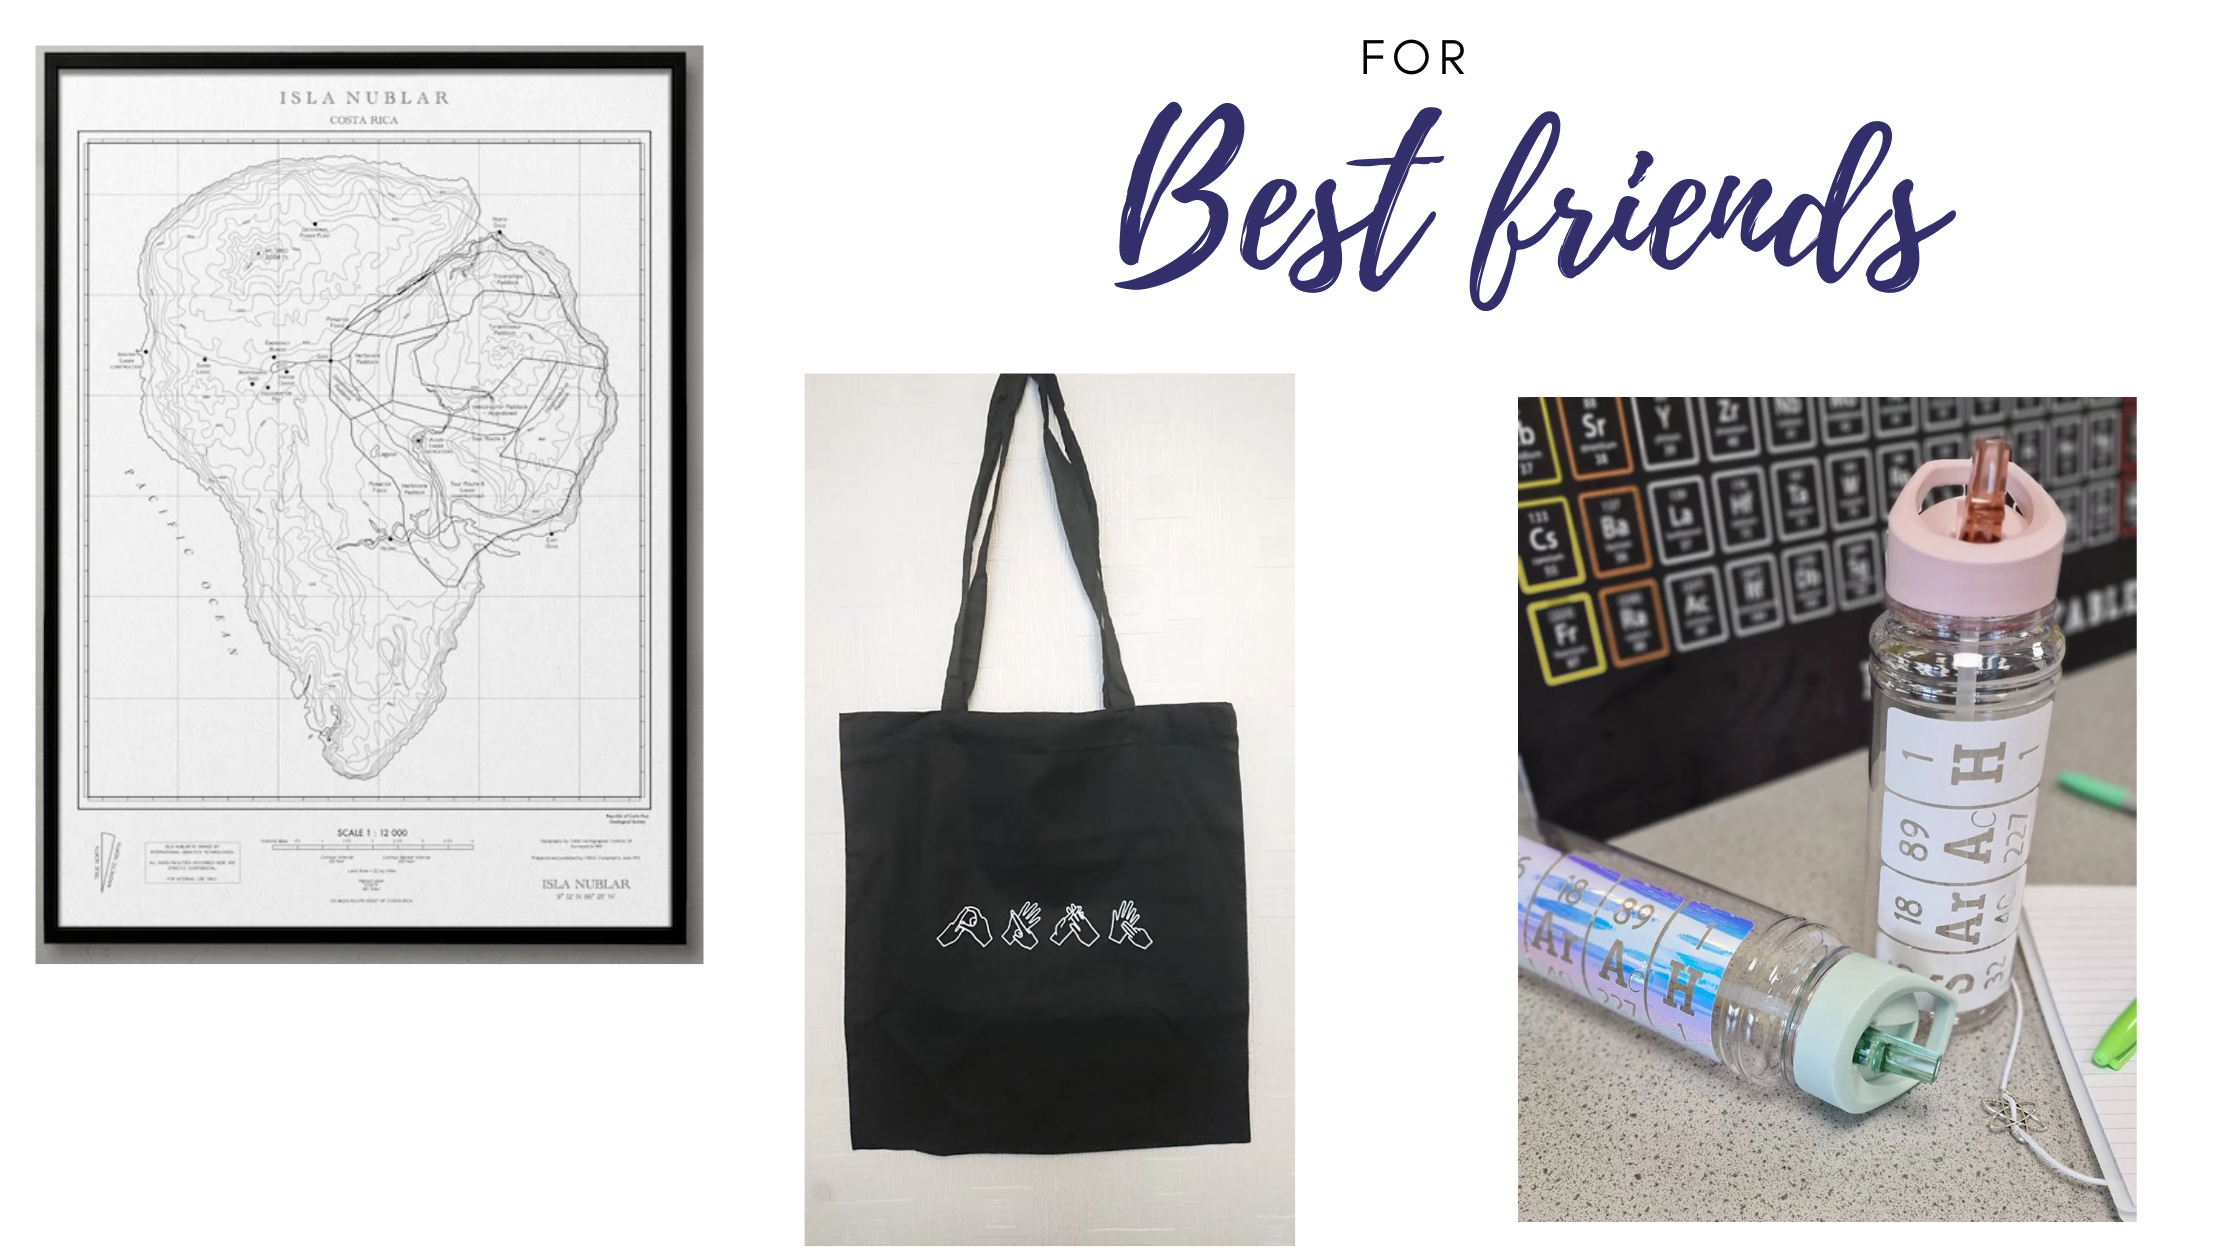 Gifts for best friends